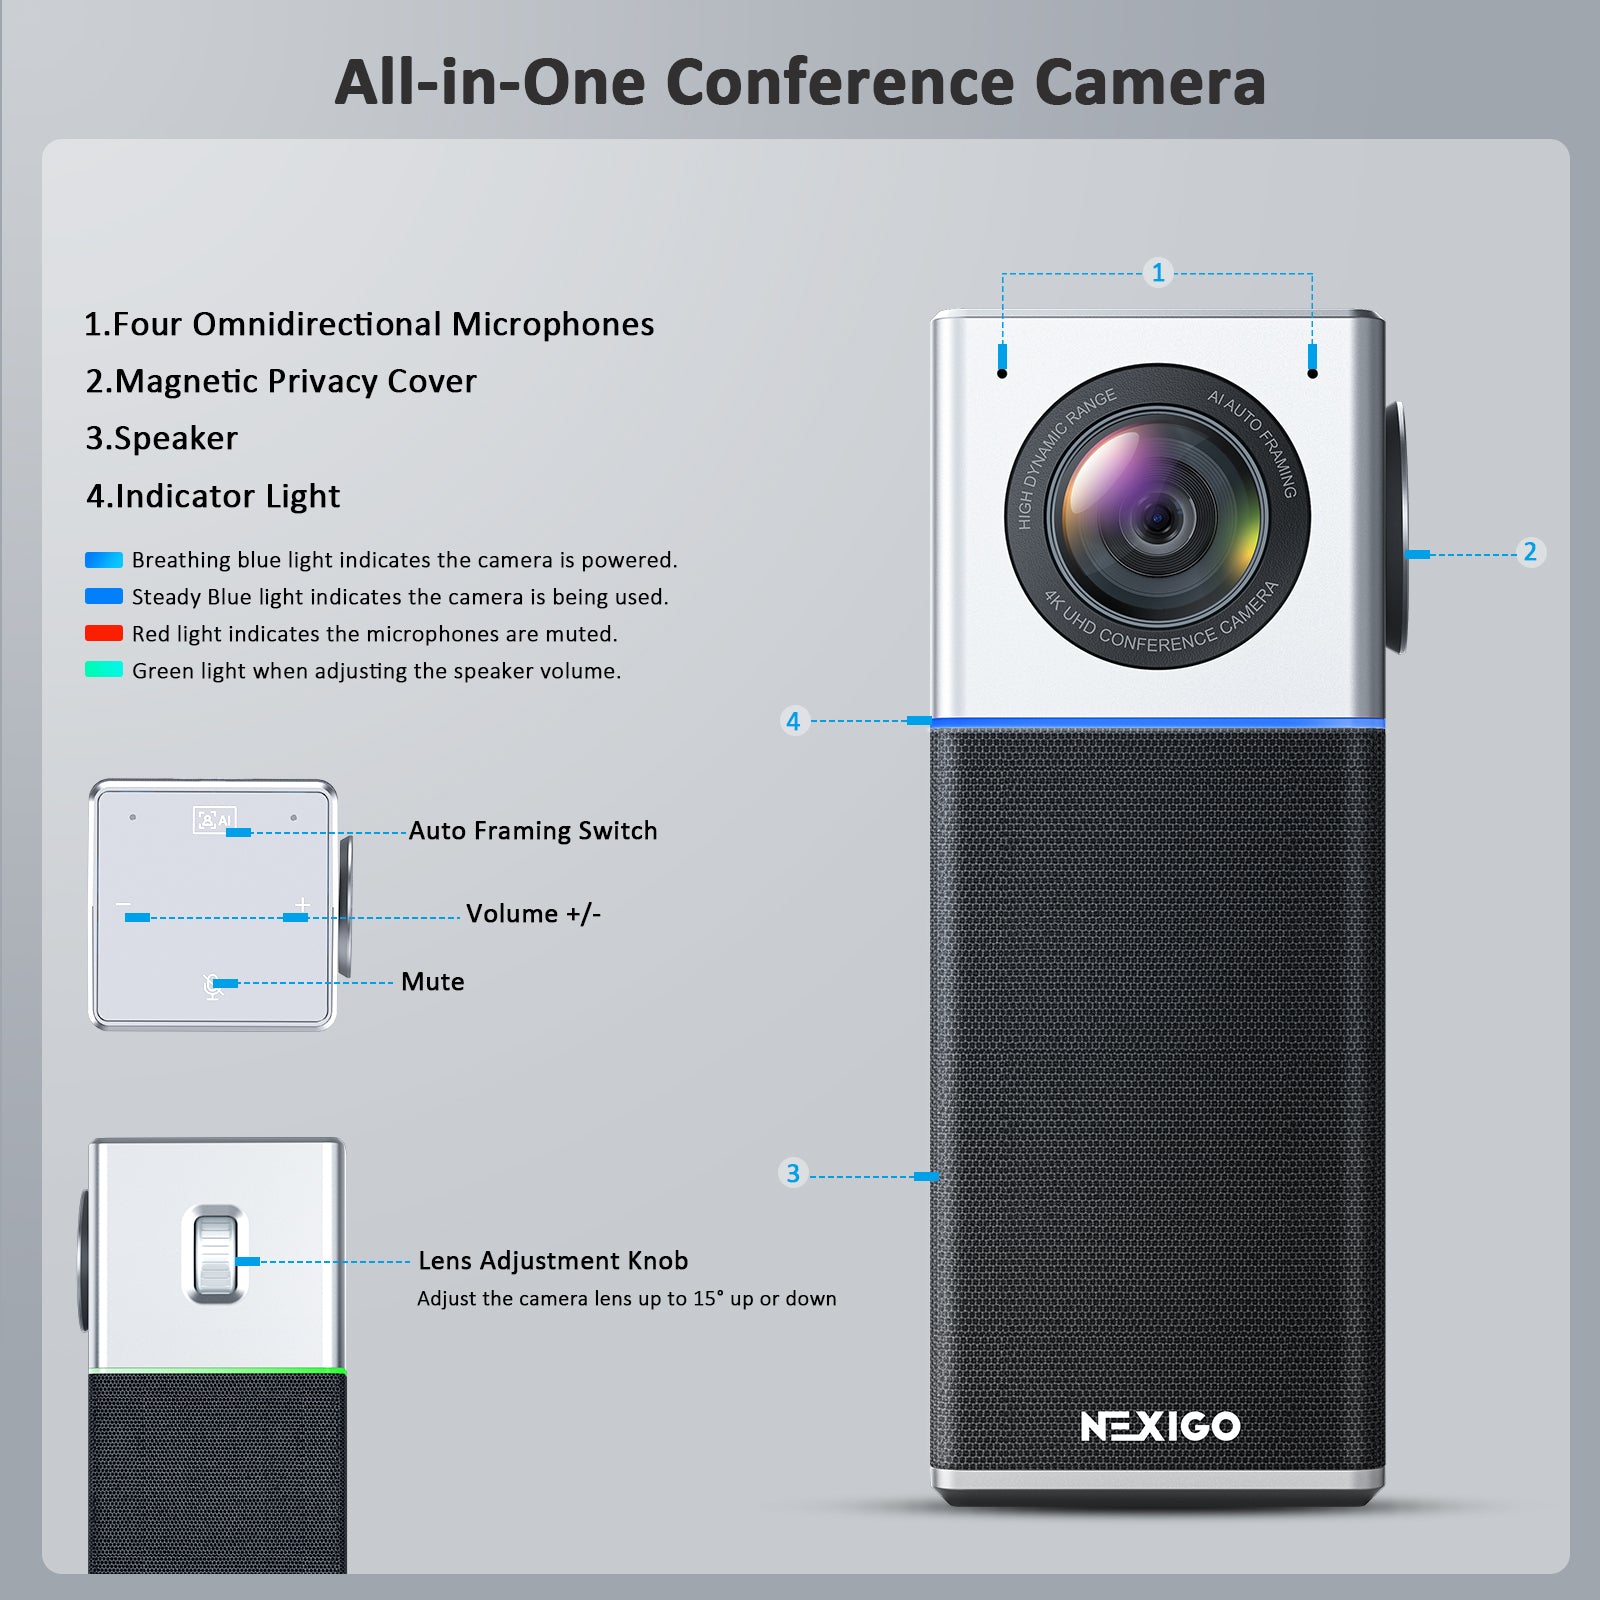 The Conference Camera features a Speaker, Indicator Light, and touch controls for mute/volume